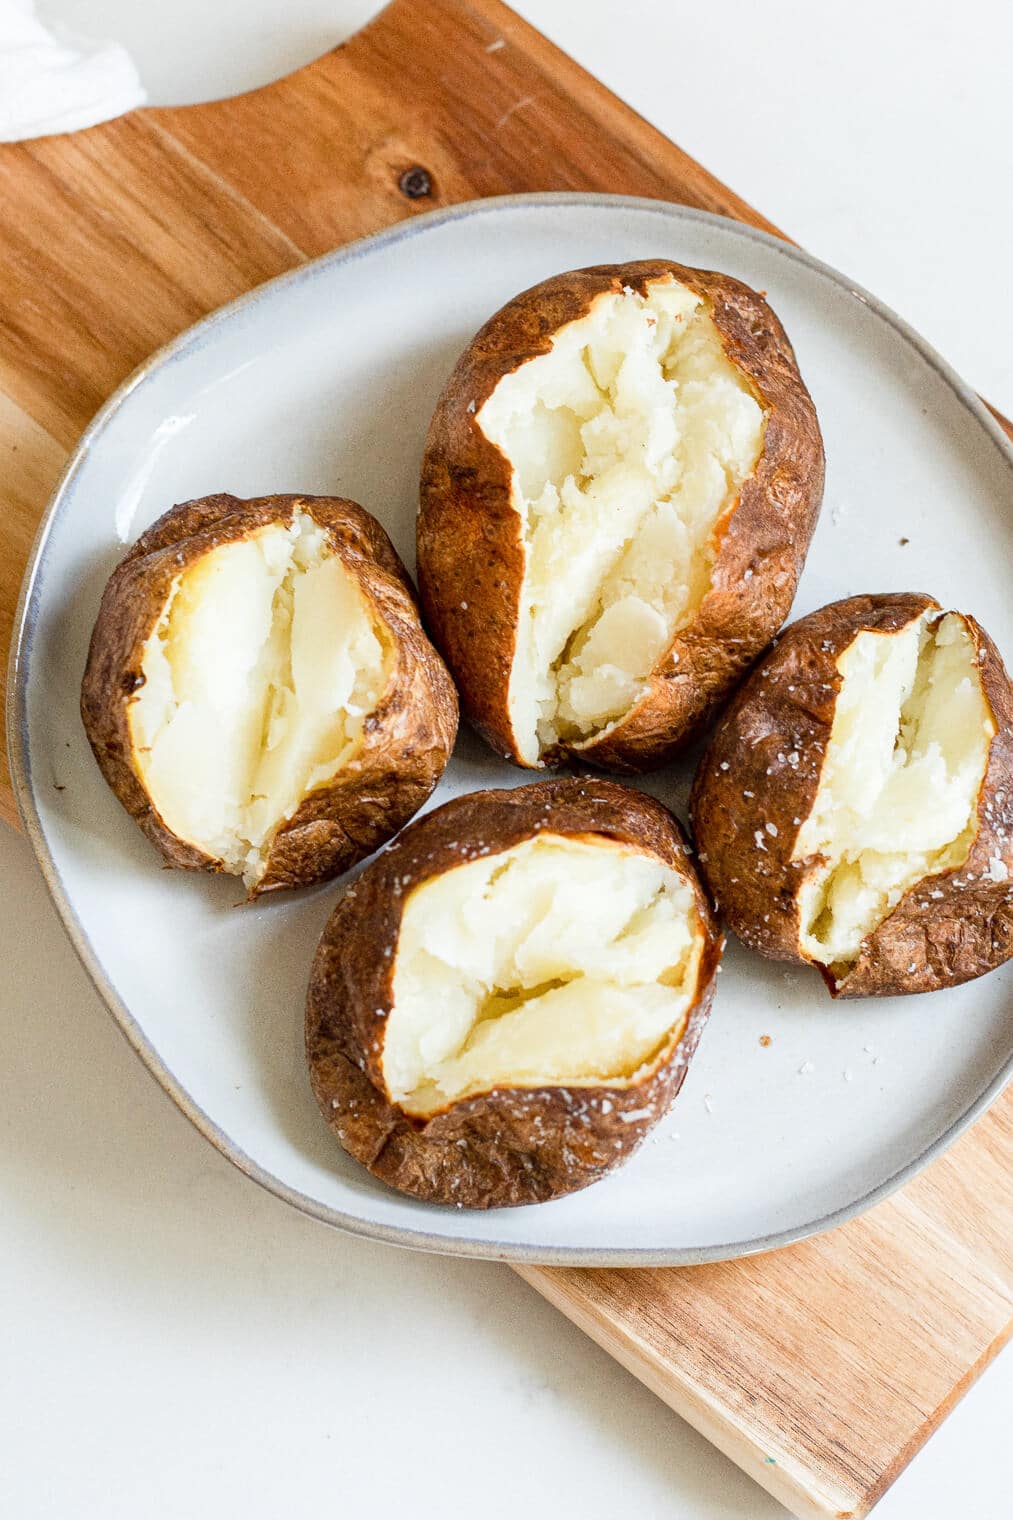 4 air fryer baked potatoes split open with butter in them